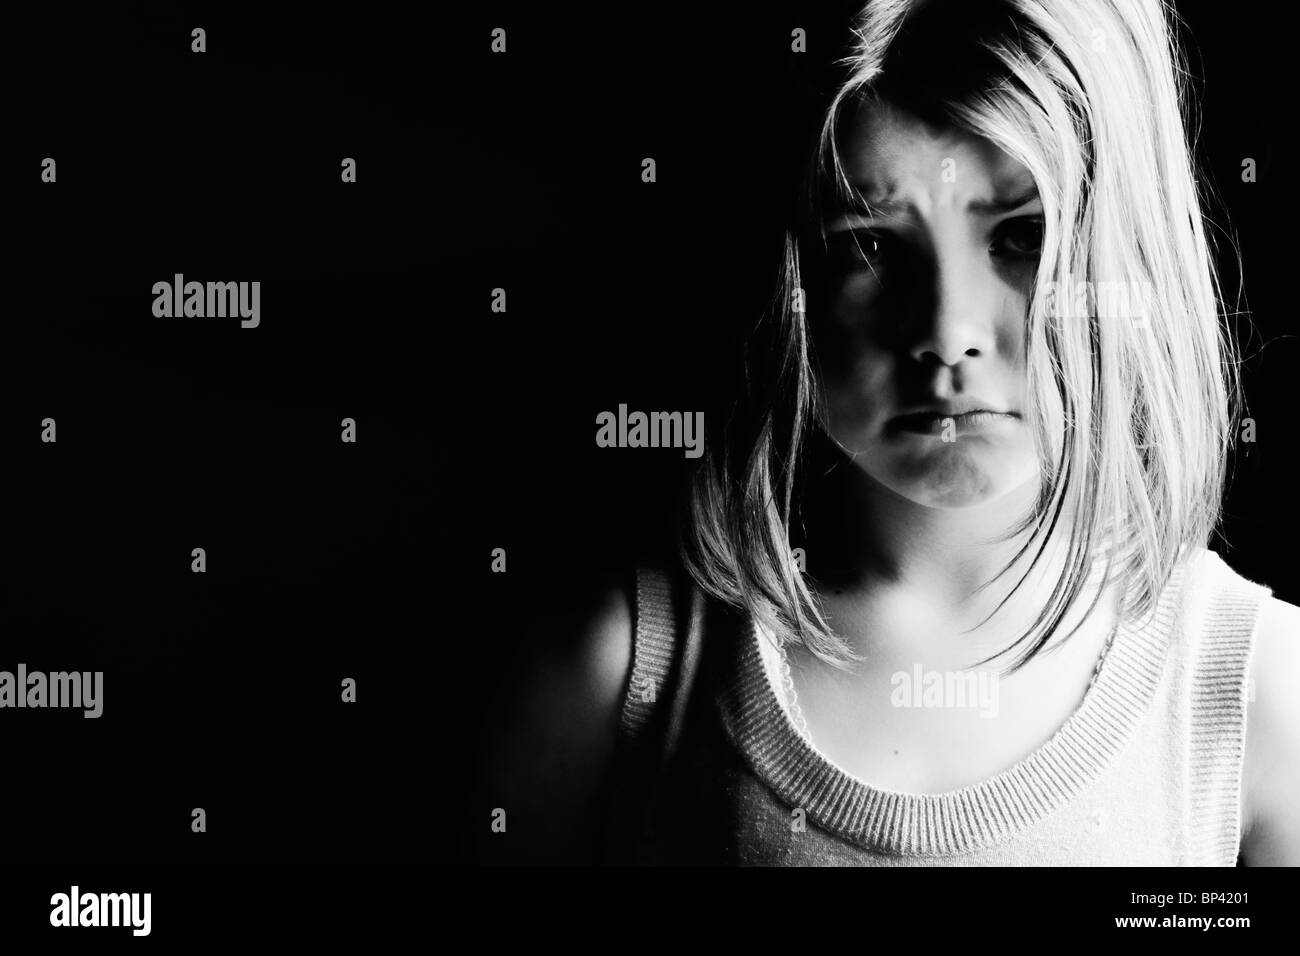 Powerful Black and White Shot of a Sad Looking Child. Images of Neglect Stock Photo